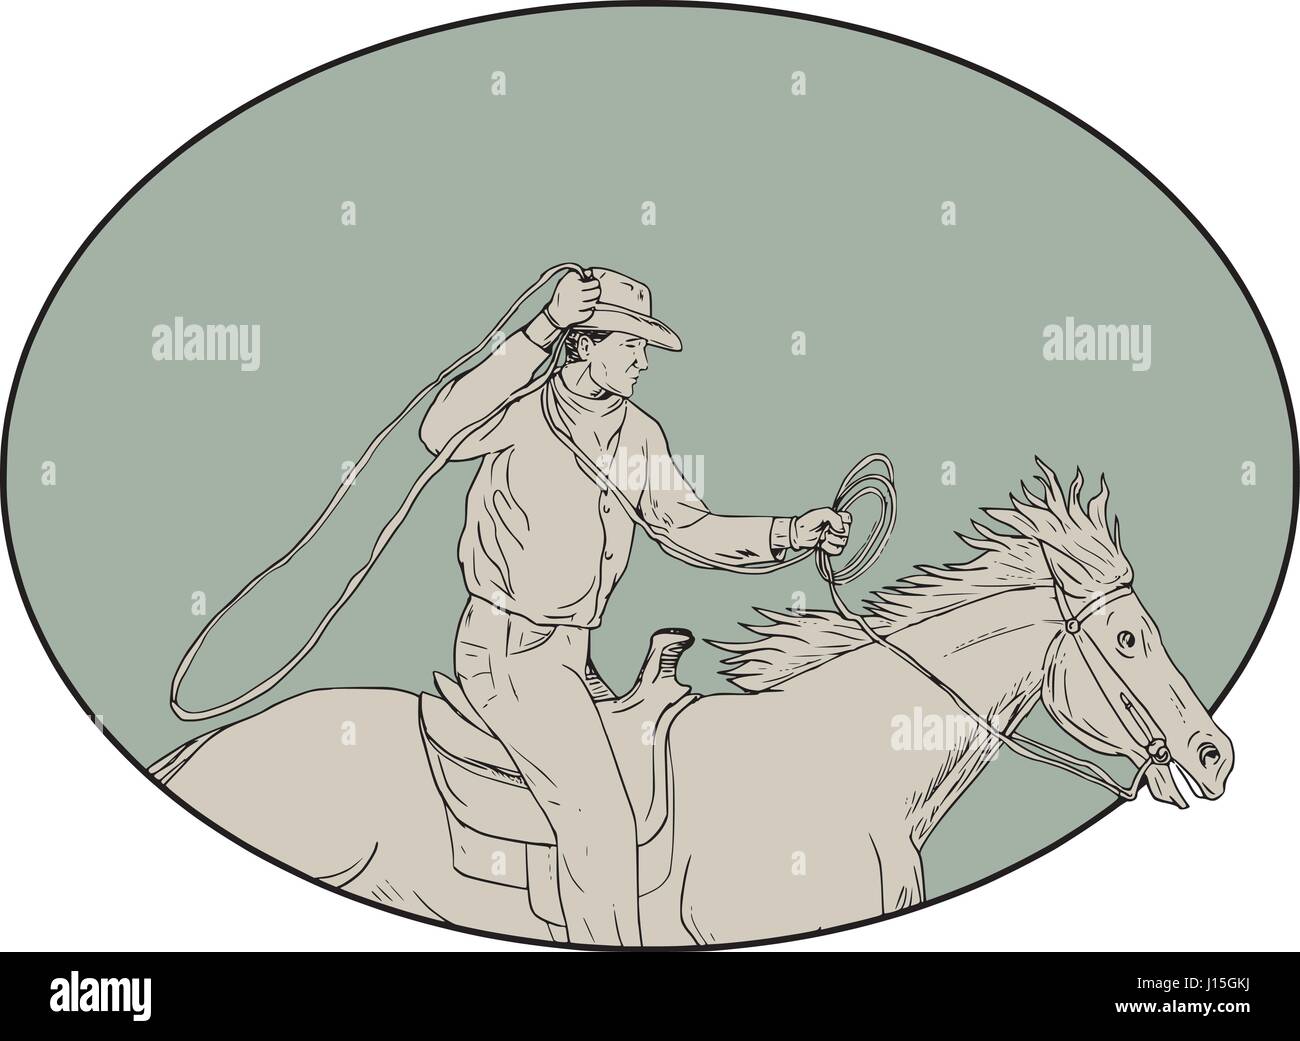 Drawing sketch style illustration of a cowboy holding lasso riding horse viewed from the side set inside oval shape. Stock Vector